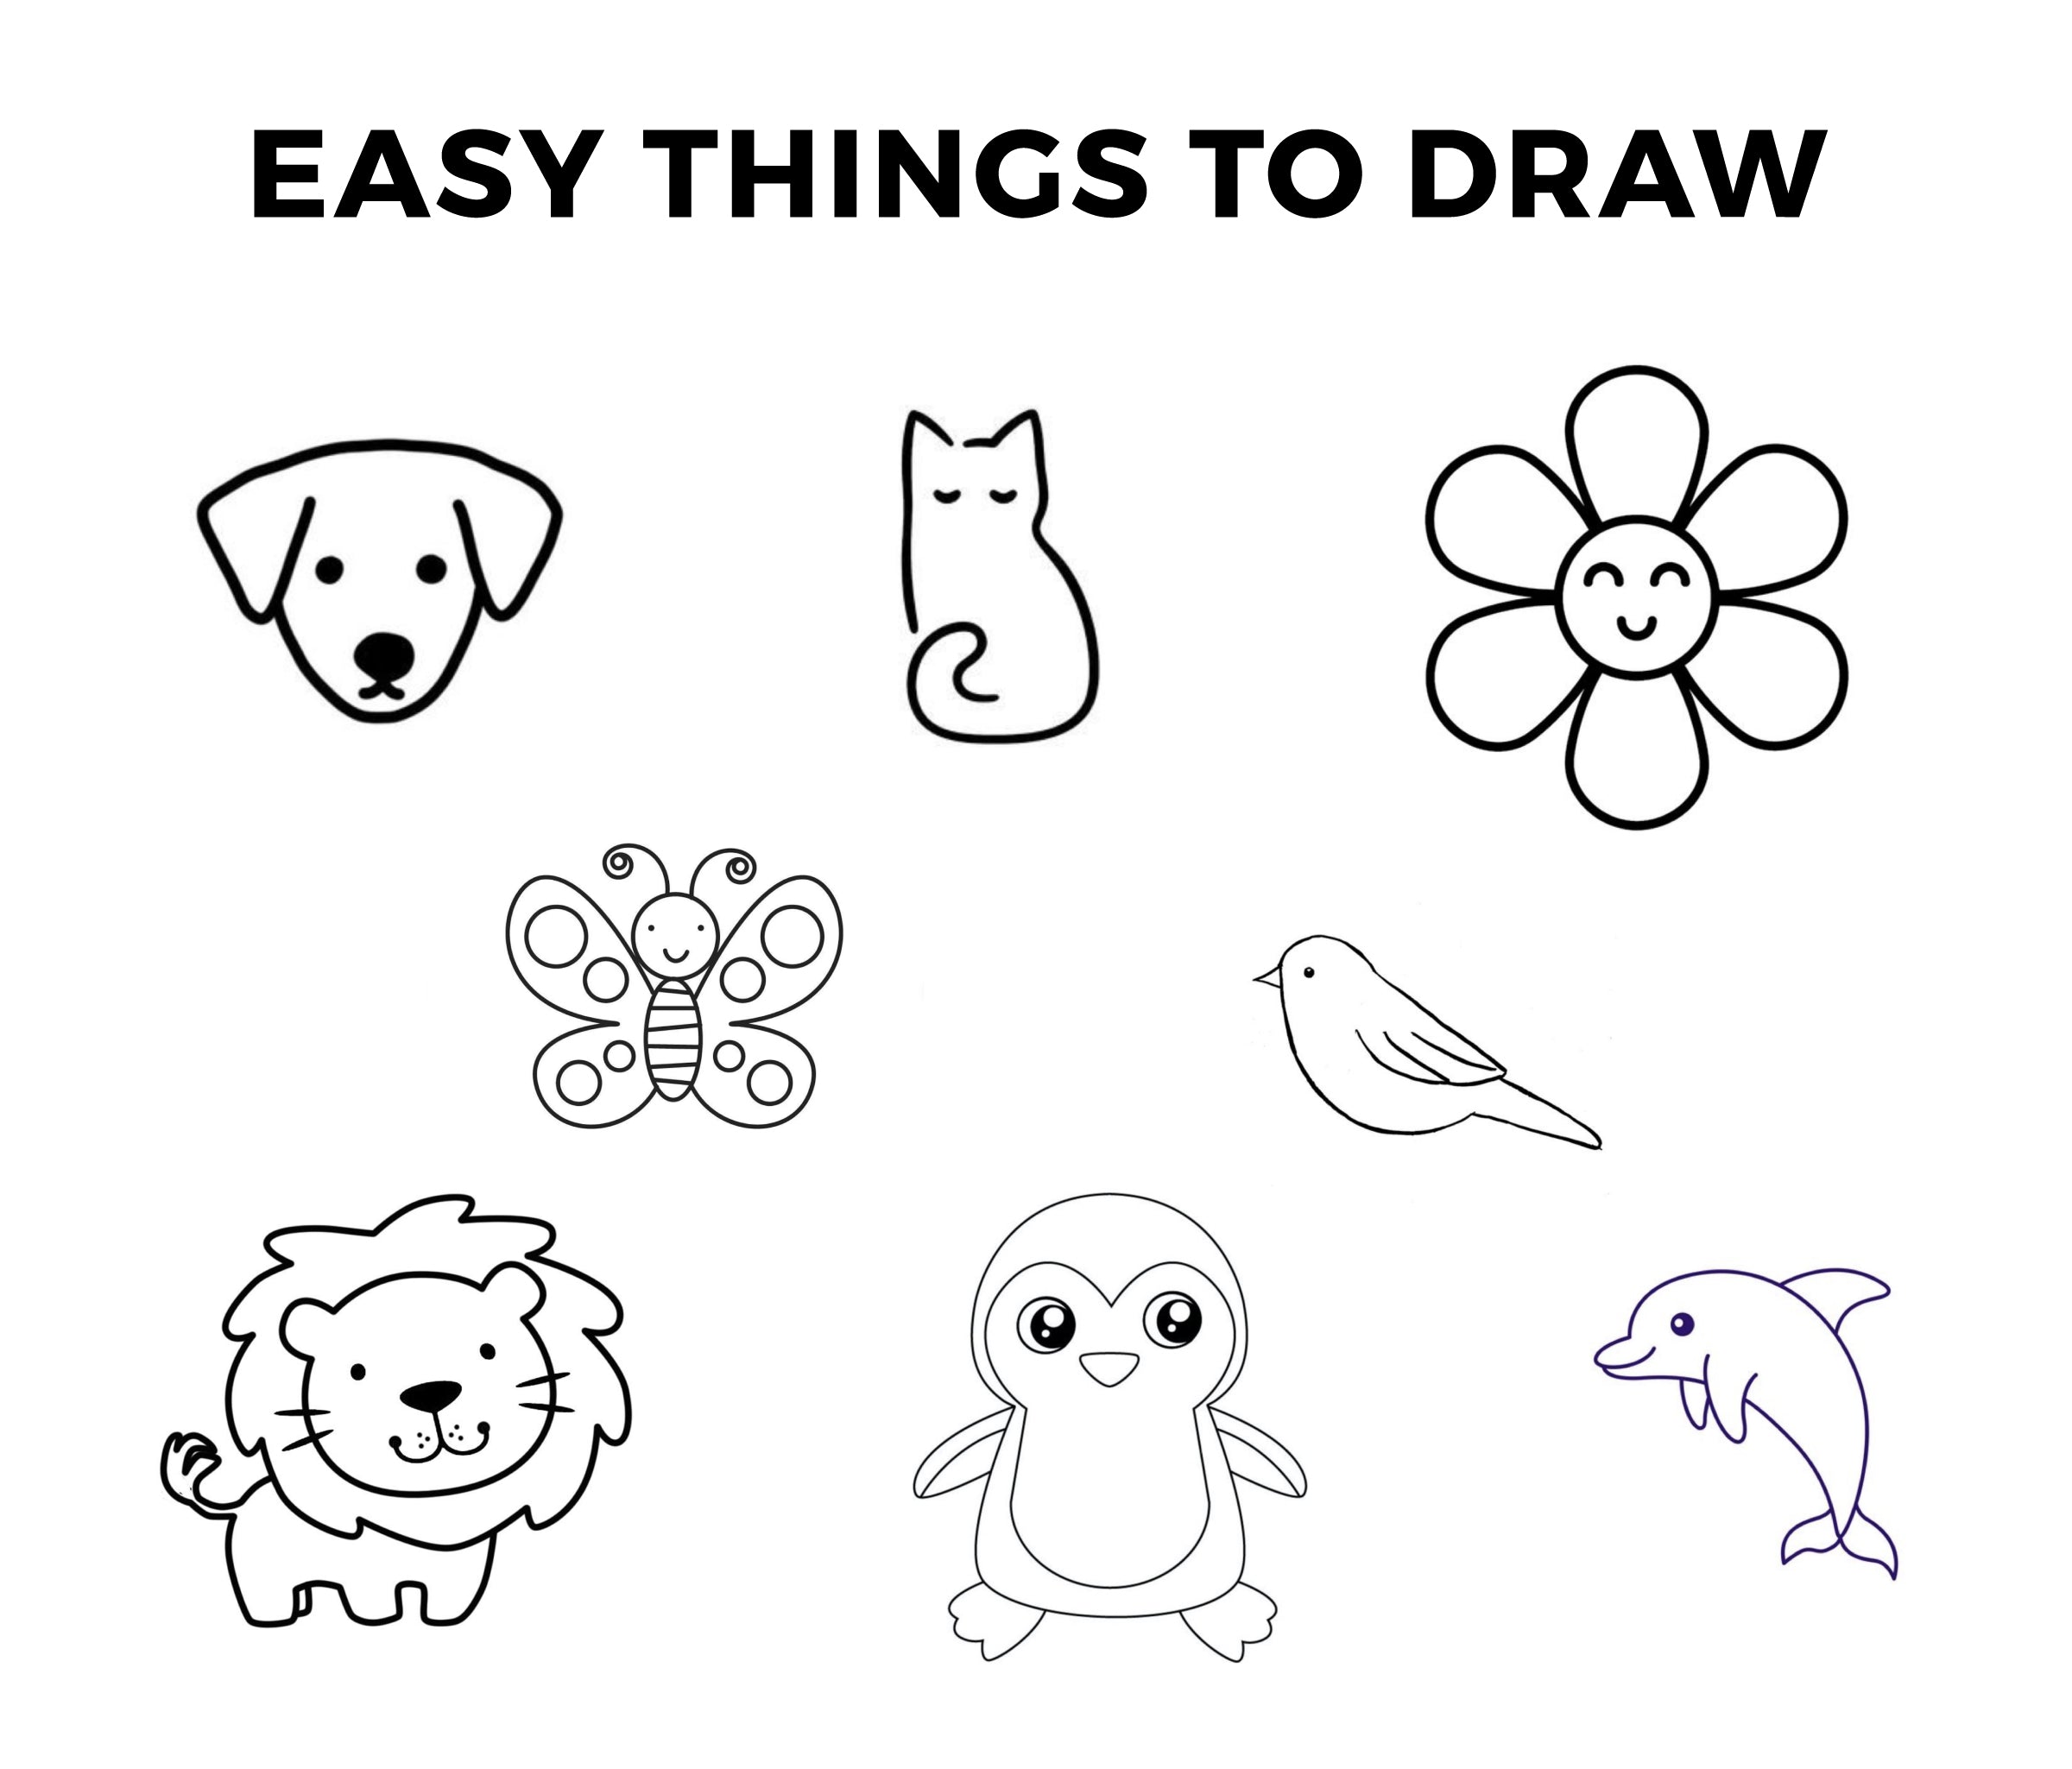 23 Cute Easy Cat Drawing Ideas - The Clever Heart